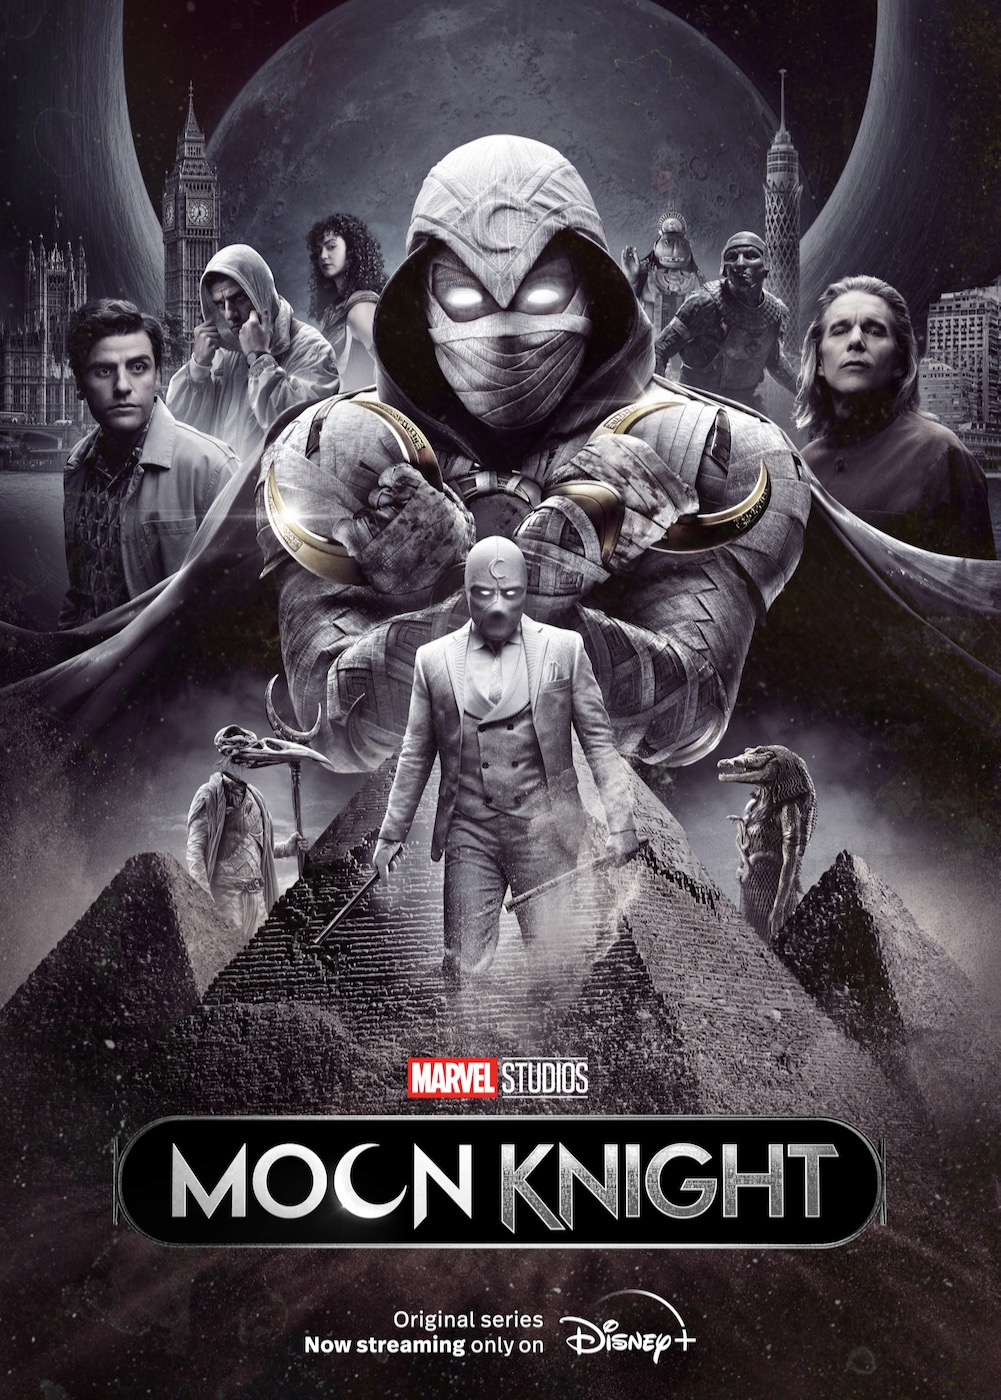 Moon Knight Review: Oscar Isaac's Marvel Series Is a Snooze Fest